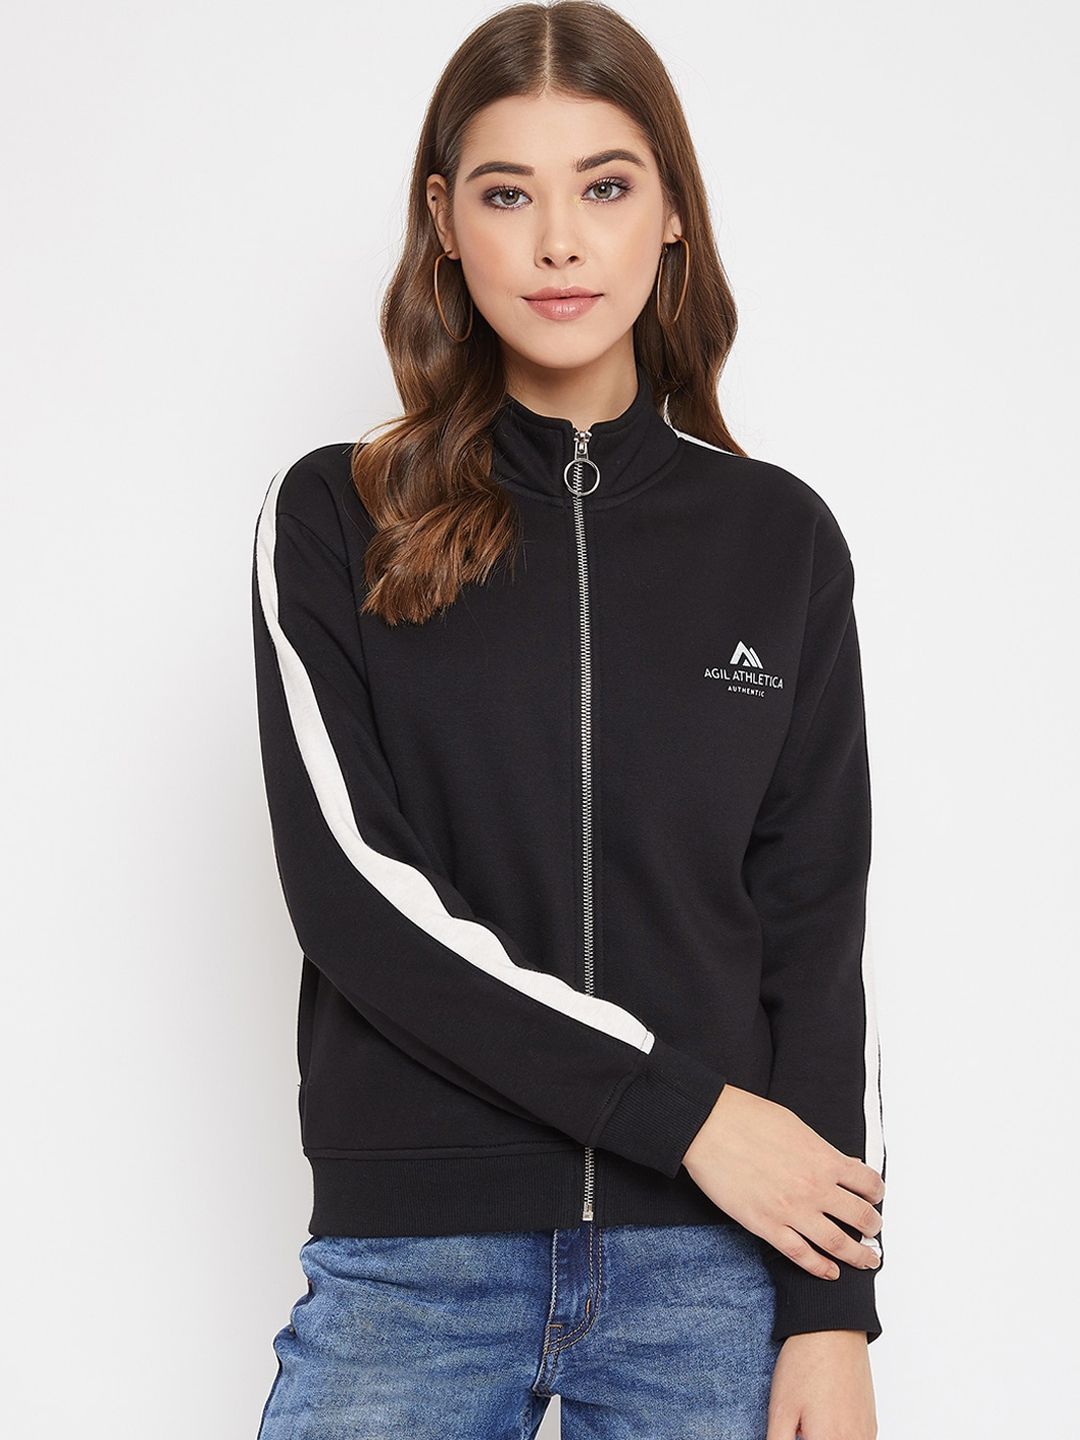 AGIL ATHLETICA Women Black Solid Sporty Jacket Price in India